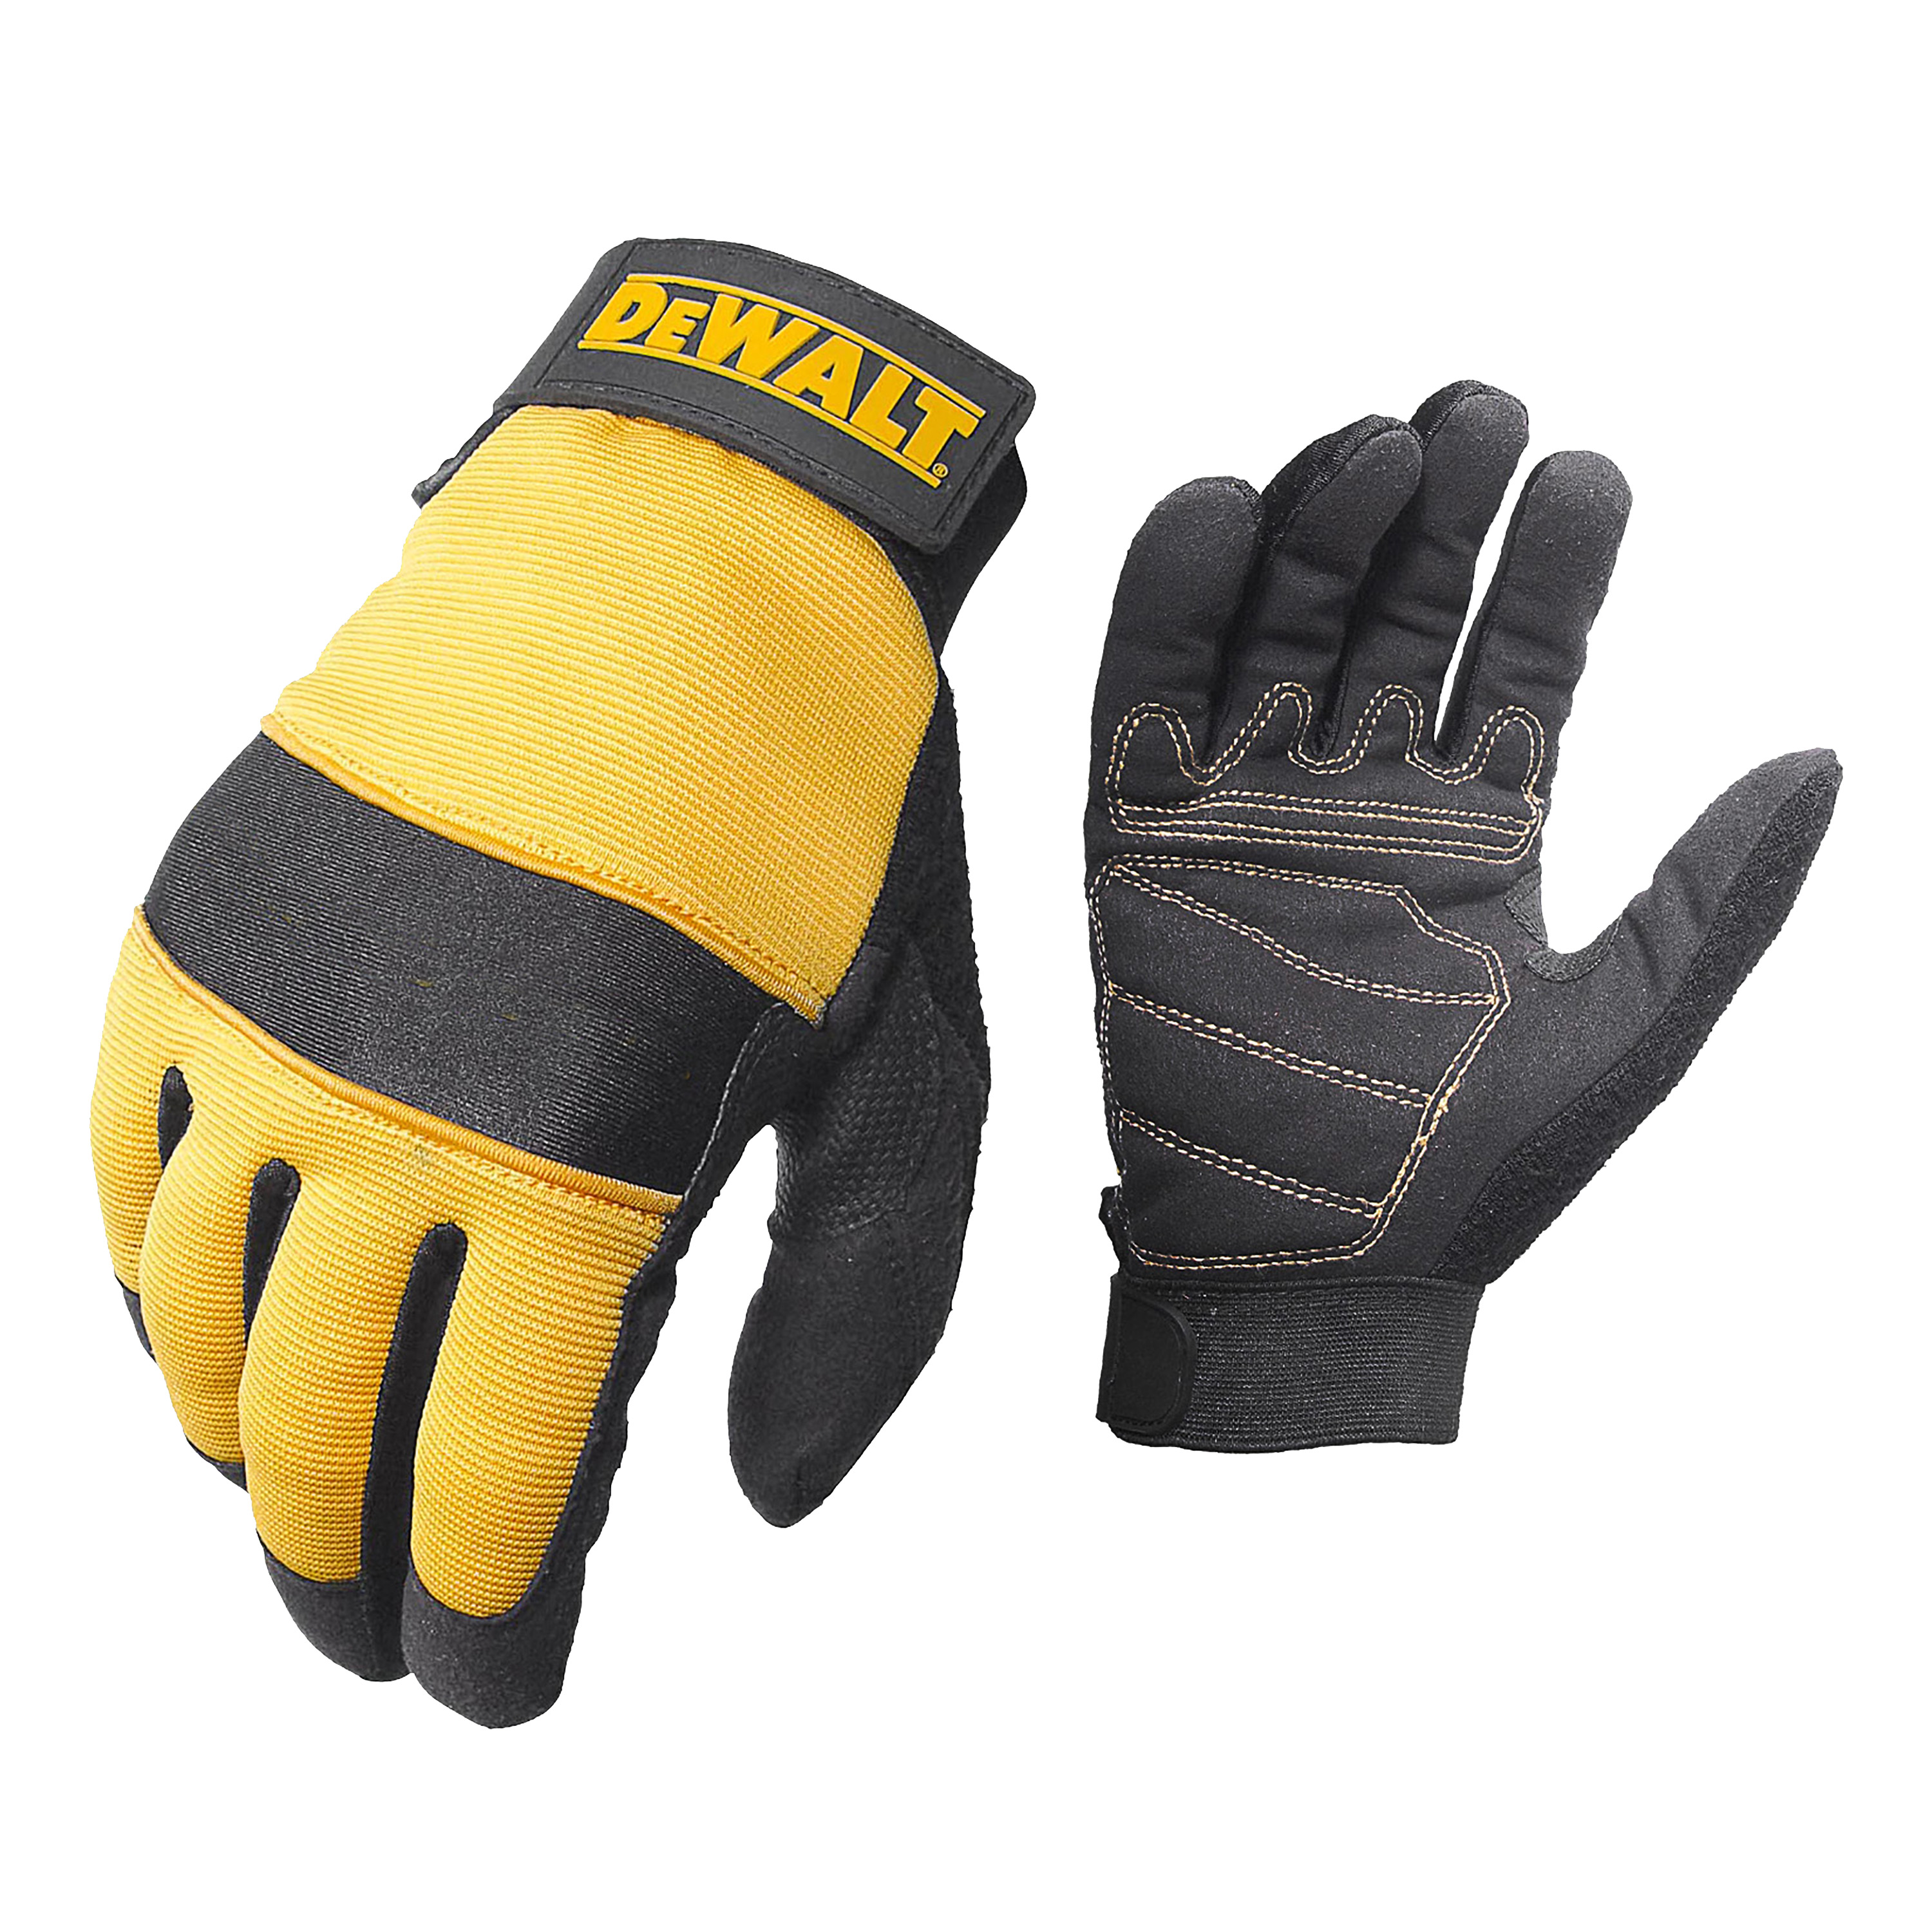 DPG20 All Purpose Synthetic Leather Glove - Size L